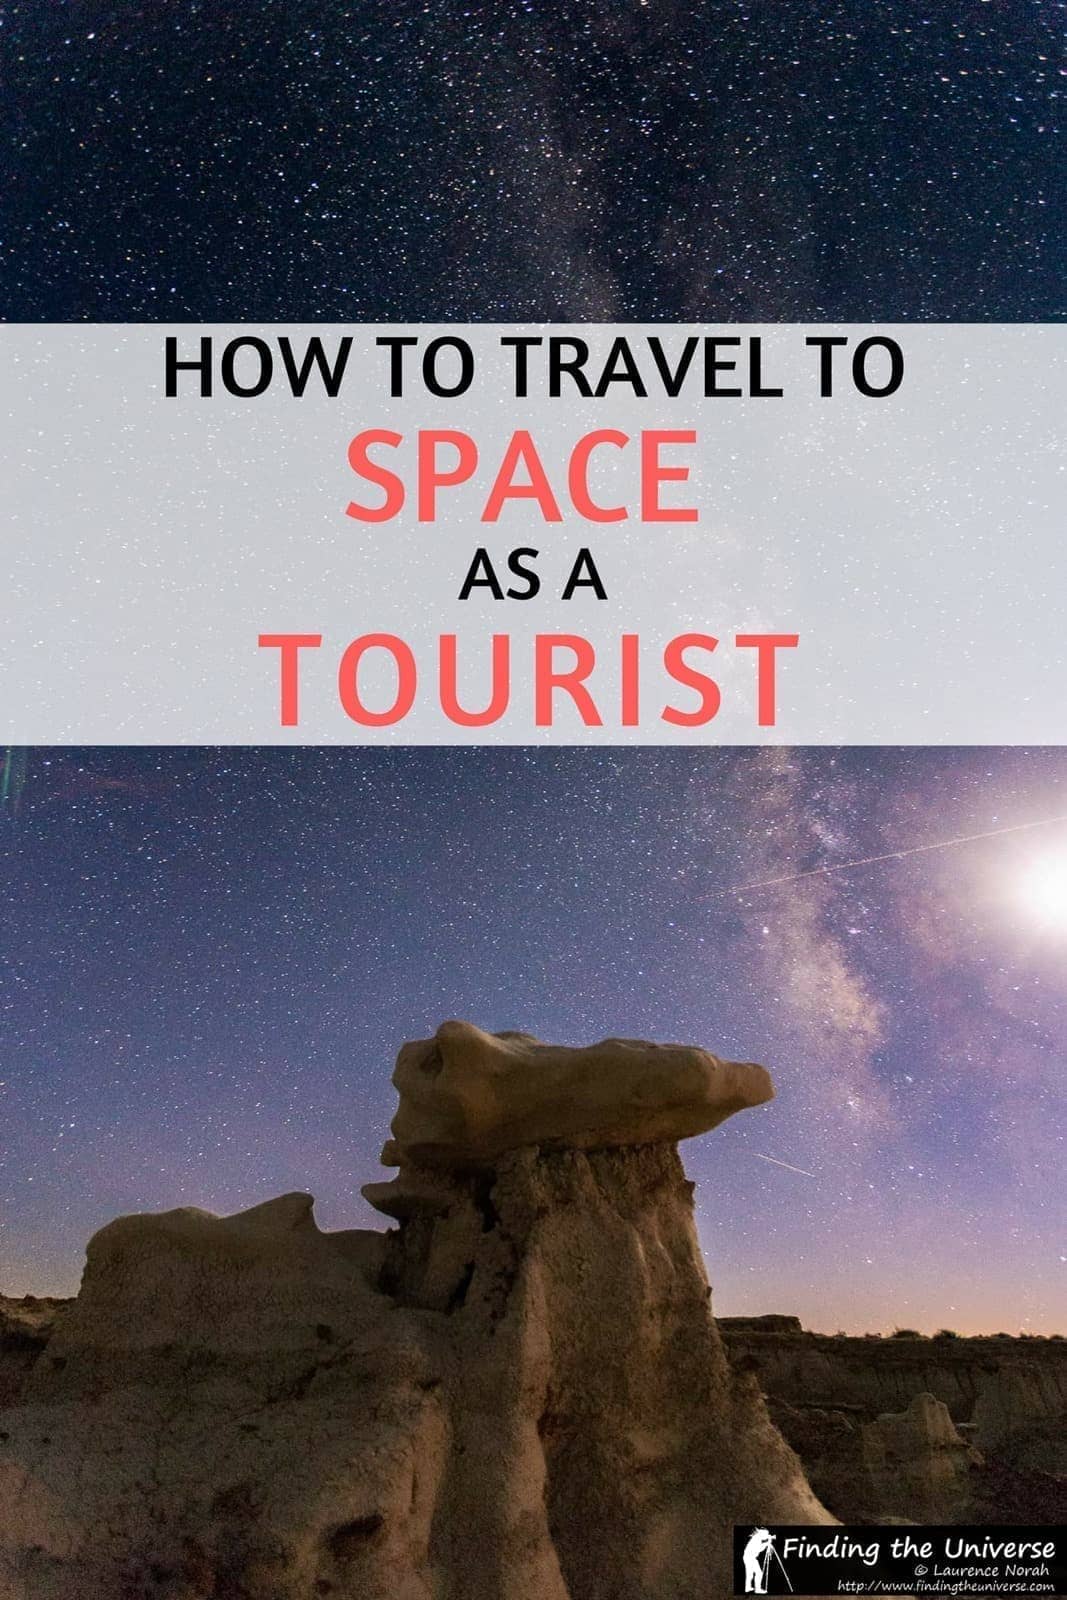 Everything you need to know about how to get into space as a tourist, as well as details of the top earth-bound space-based attractions around the world!